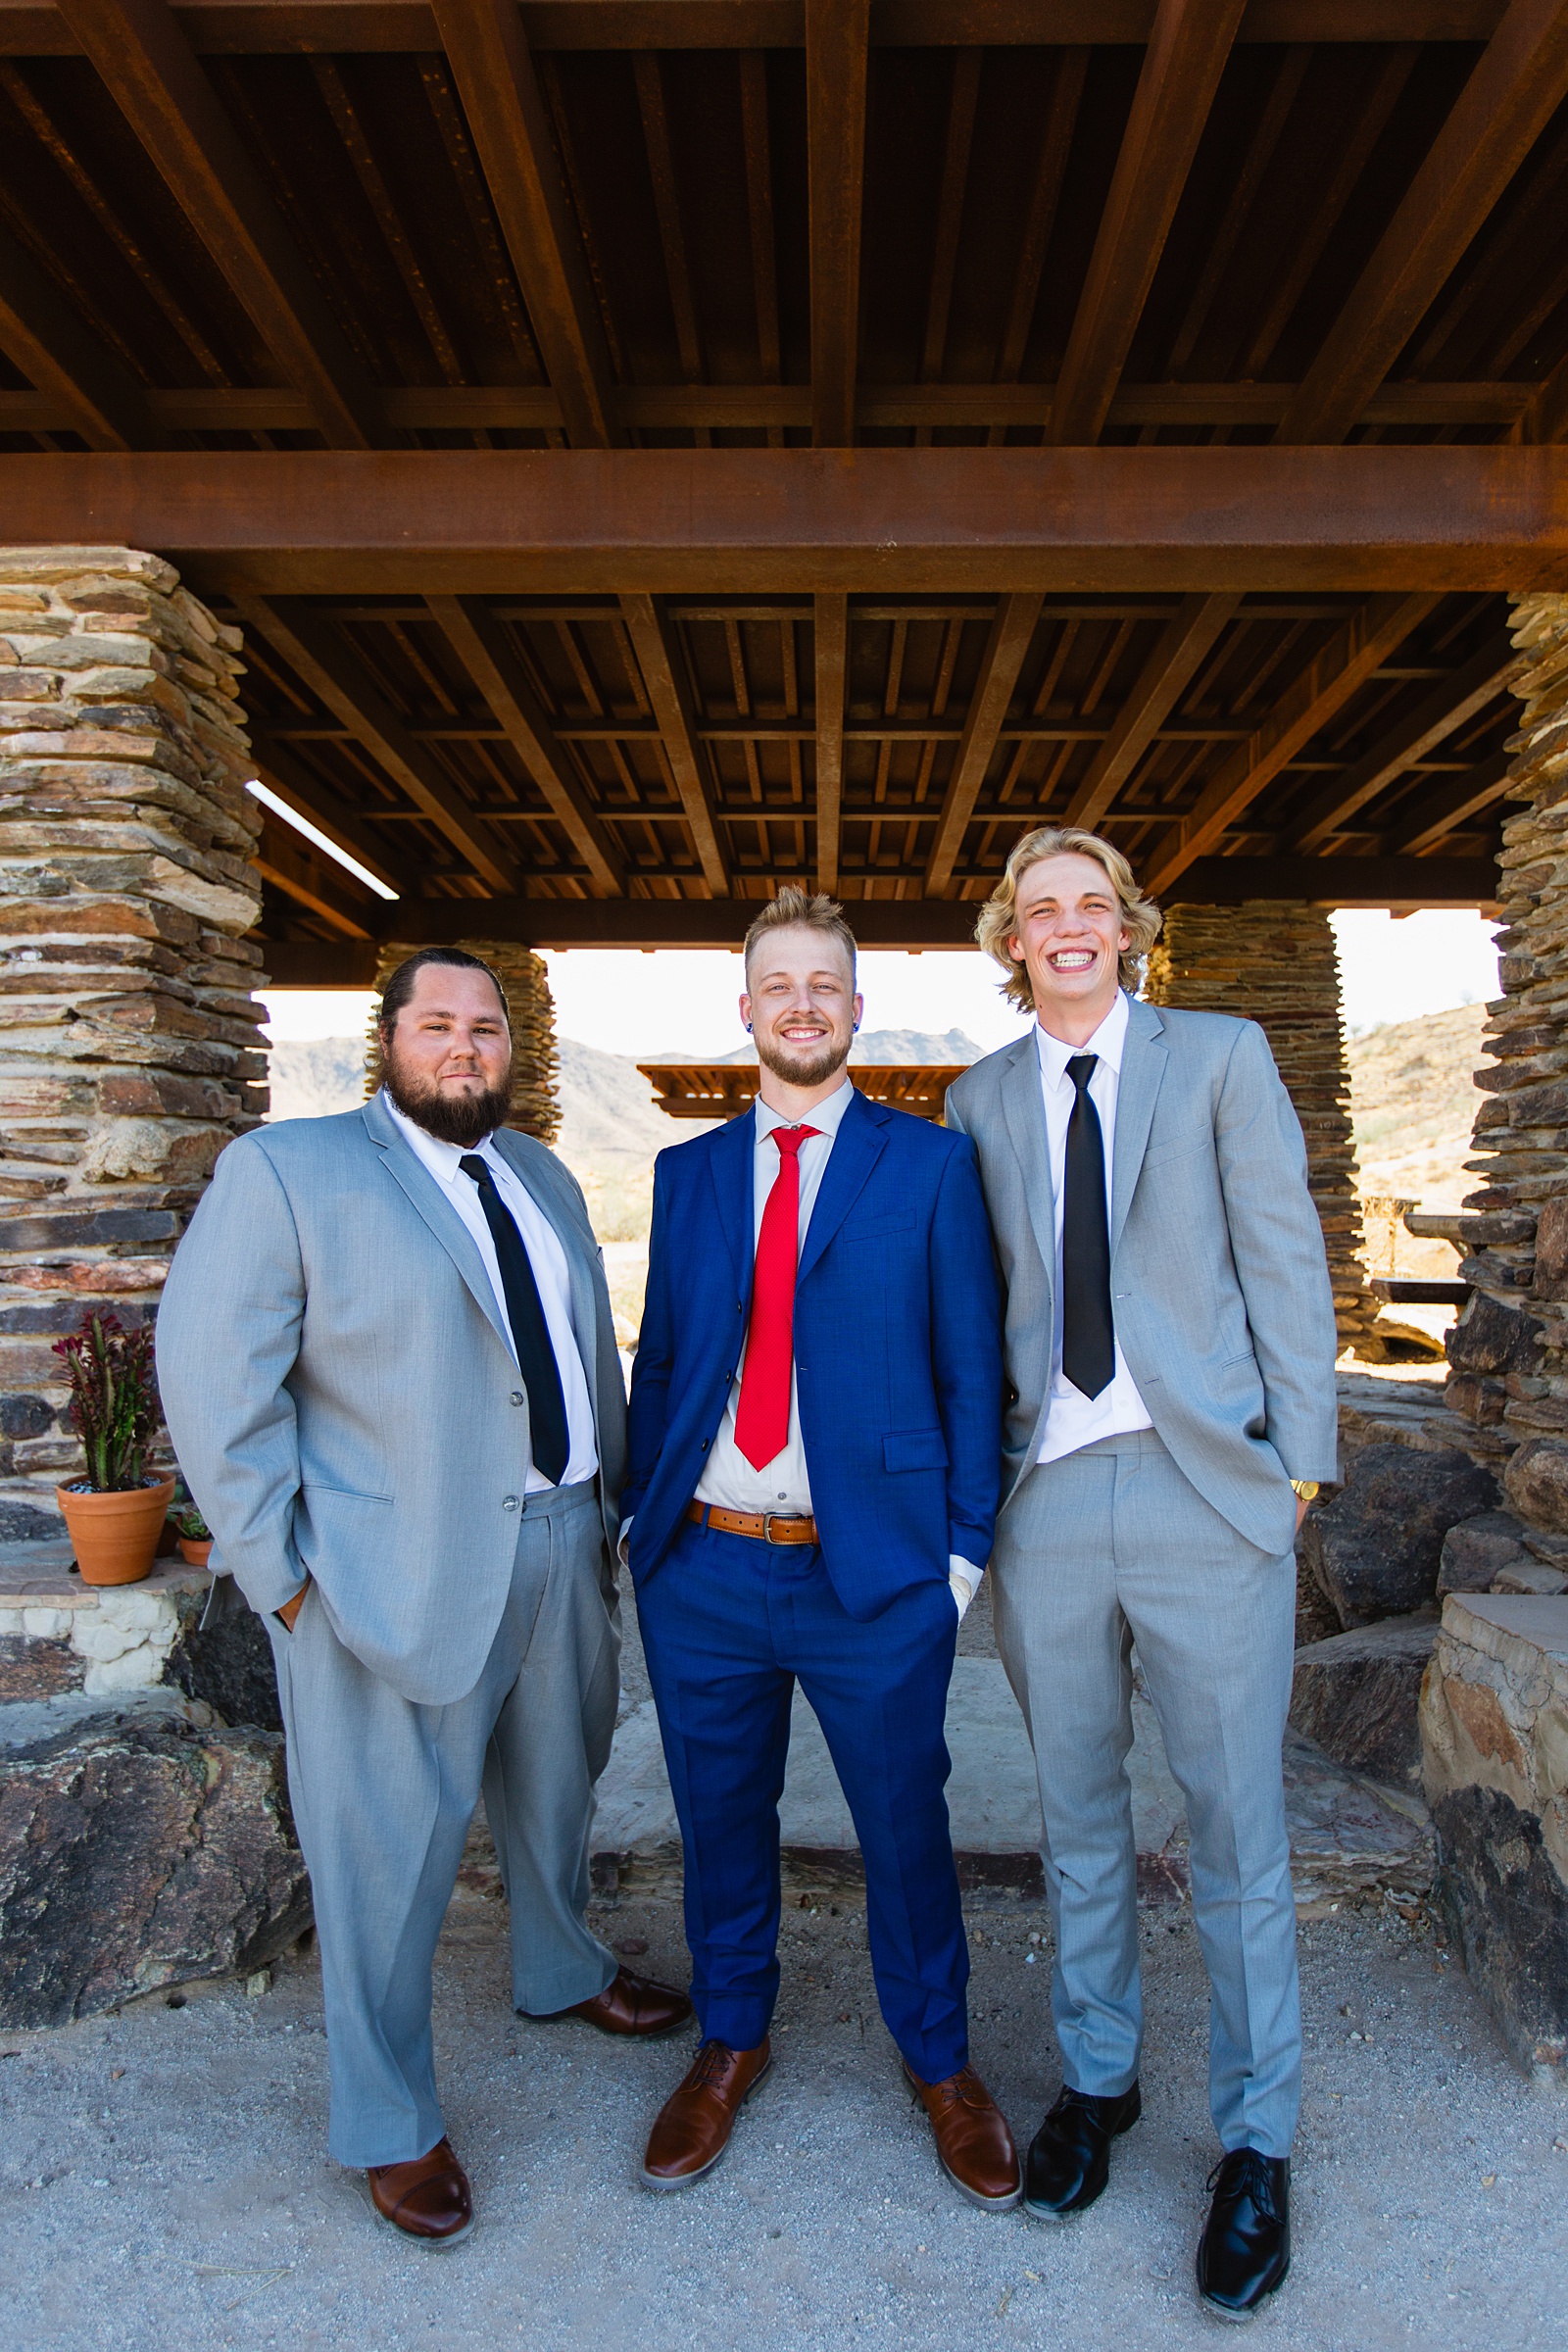 Groom and groomsmen together at a intimate desert wedding by Arizona wedding photographer Juniper and Co Photography.